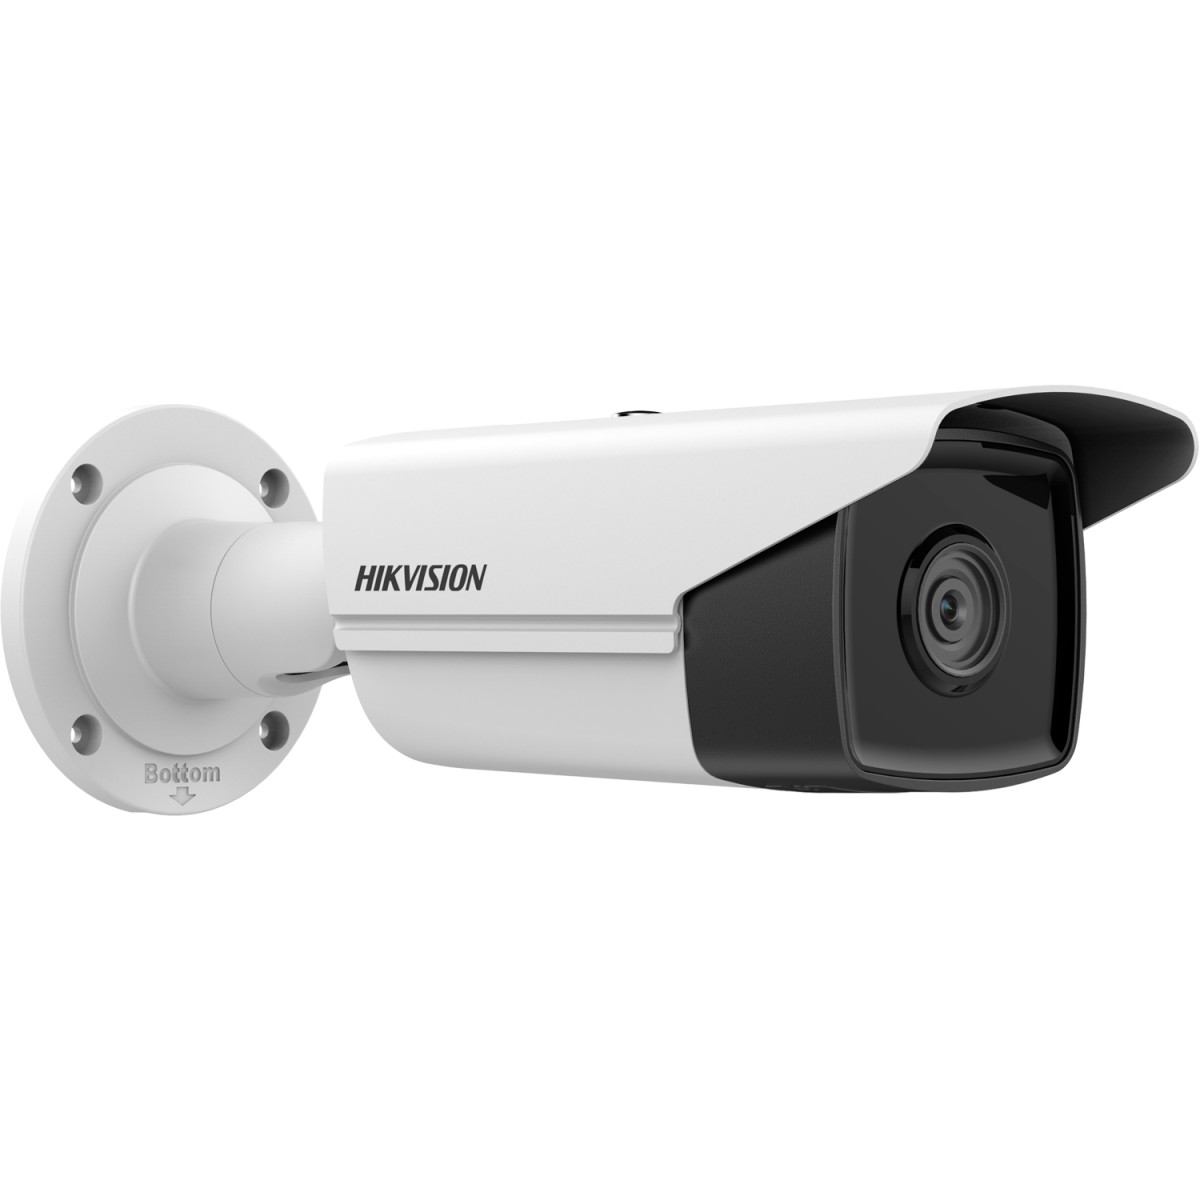 IP-камера Hikvision DS-2CD2T23G2-4I (4.0) 98_98.jpg - фото 2